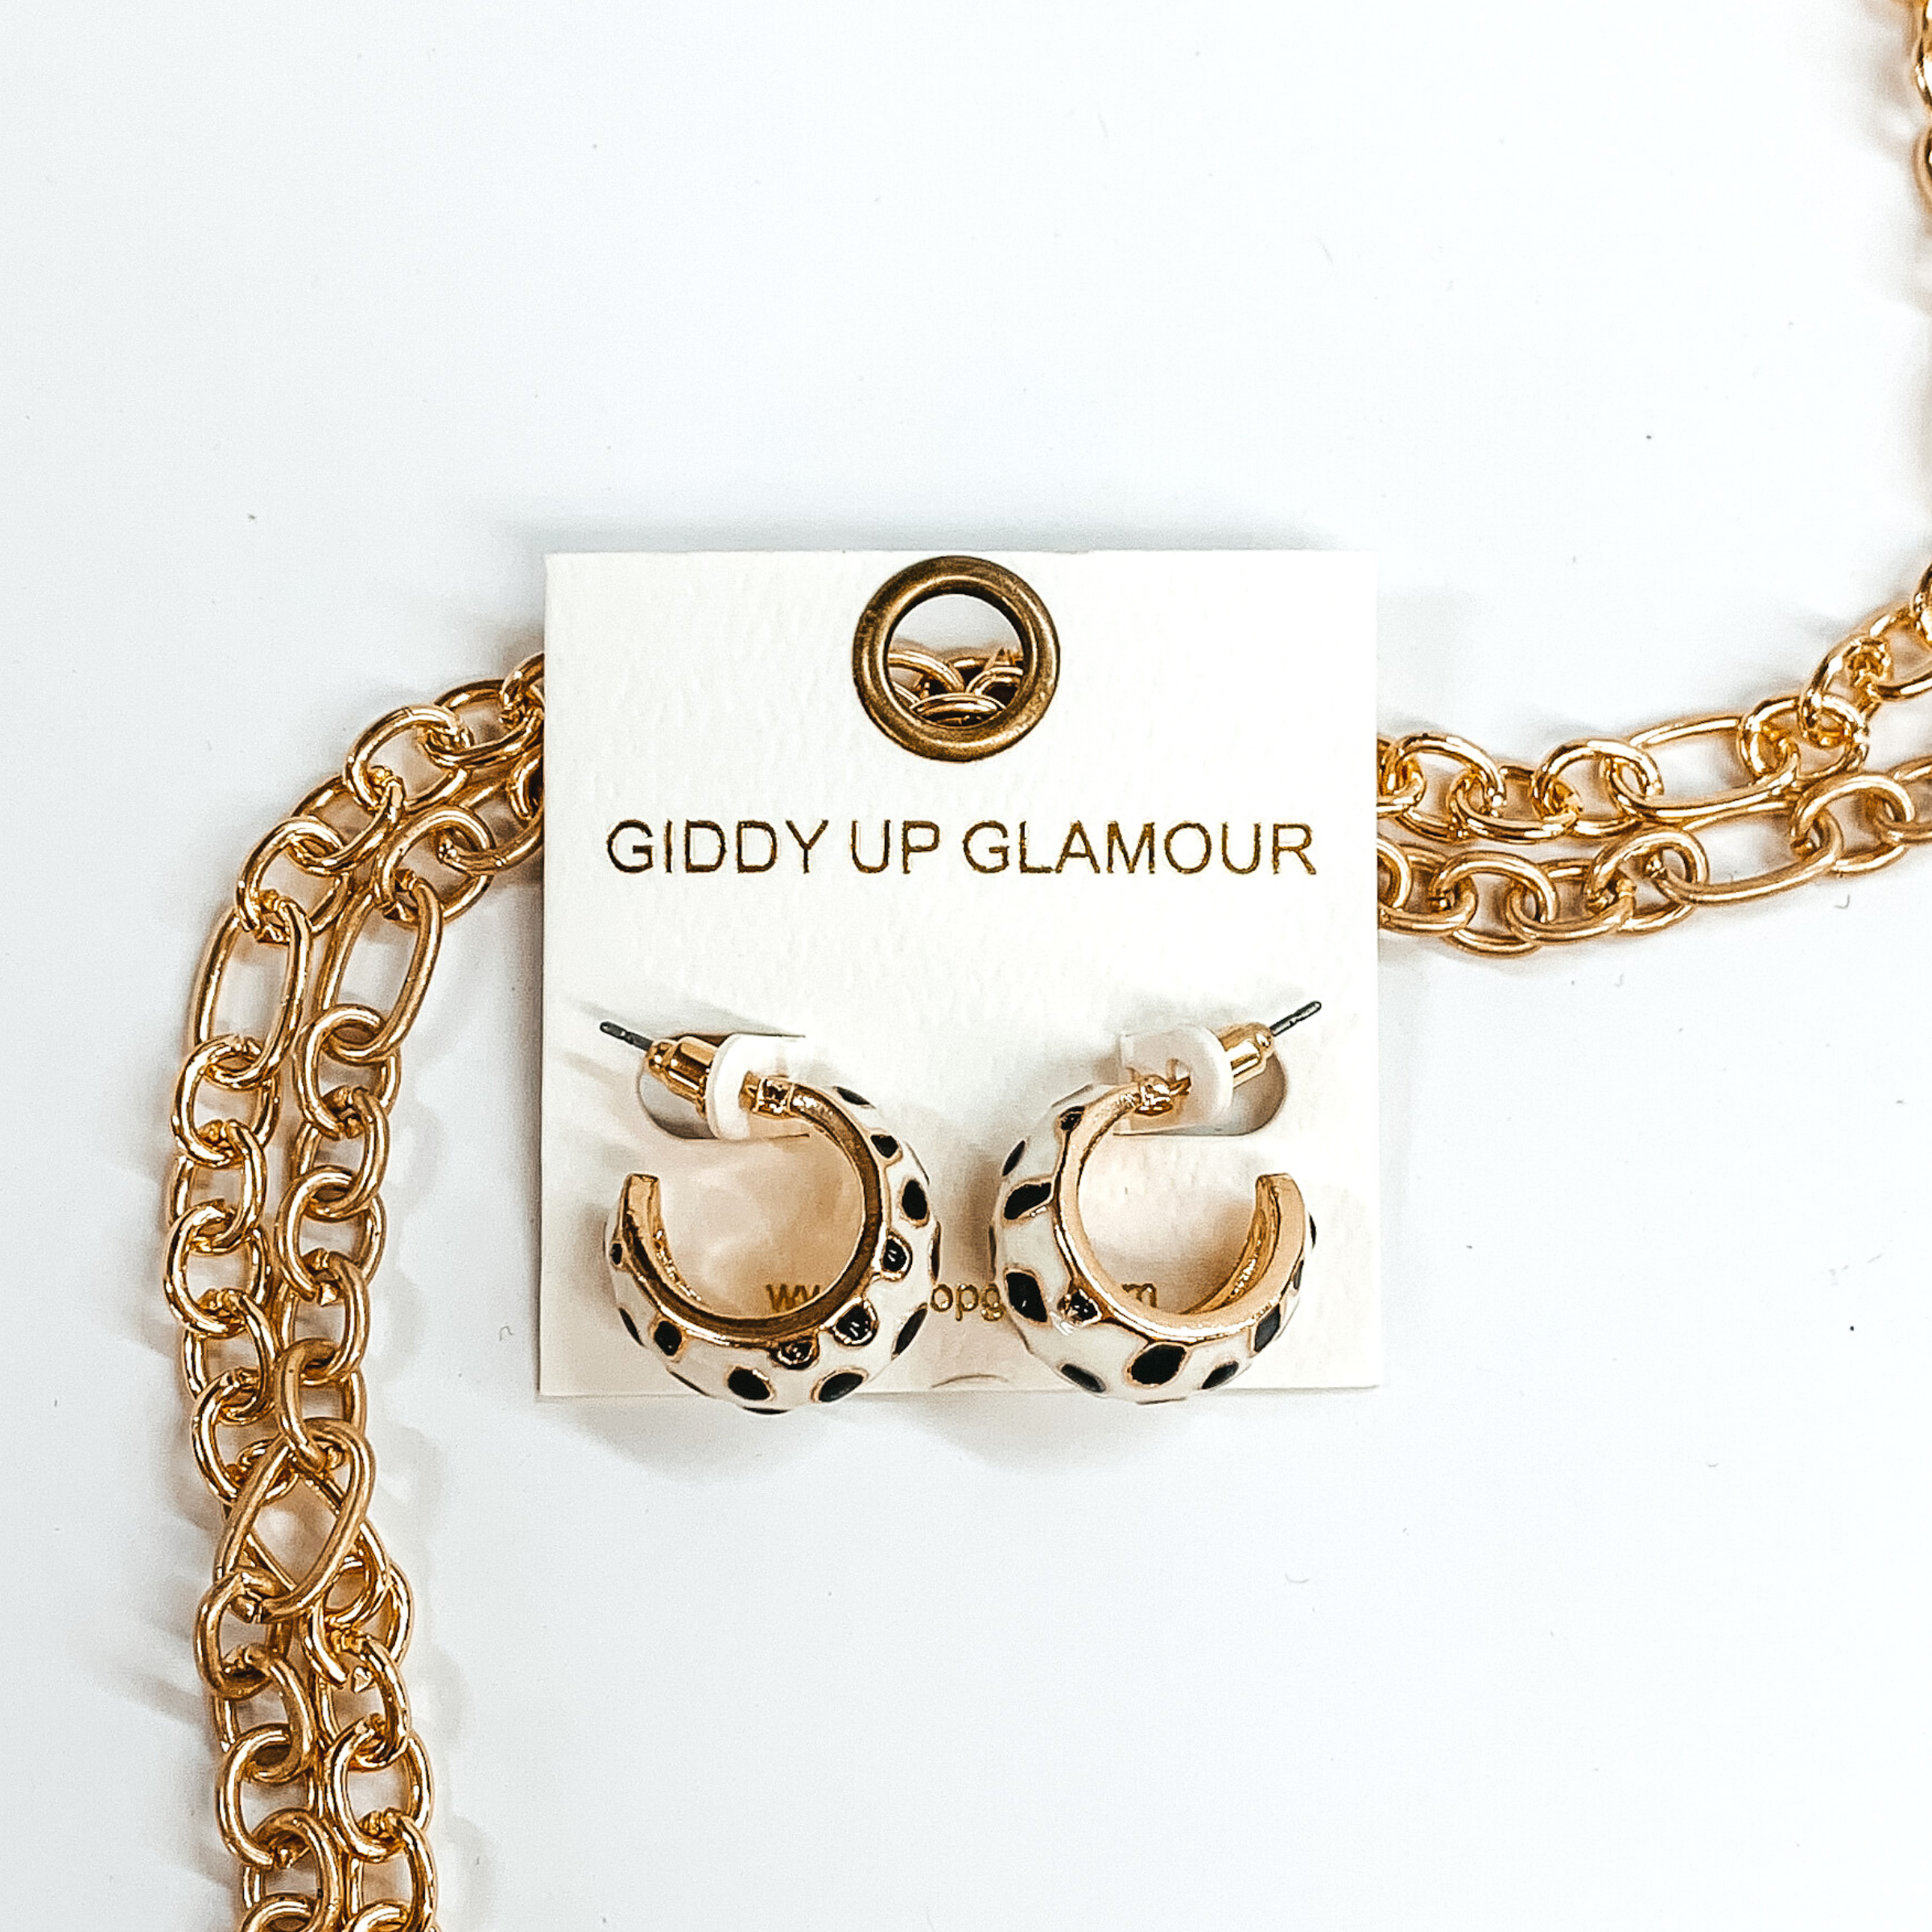 Mini, gold outline, white hoop huggies with black cheetah print.These earrings are pictured on a white earrings holder, laying on top of gold chains on a white background.